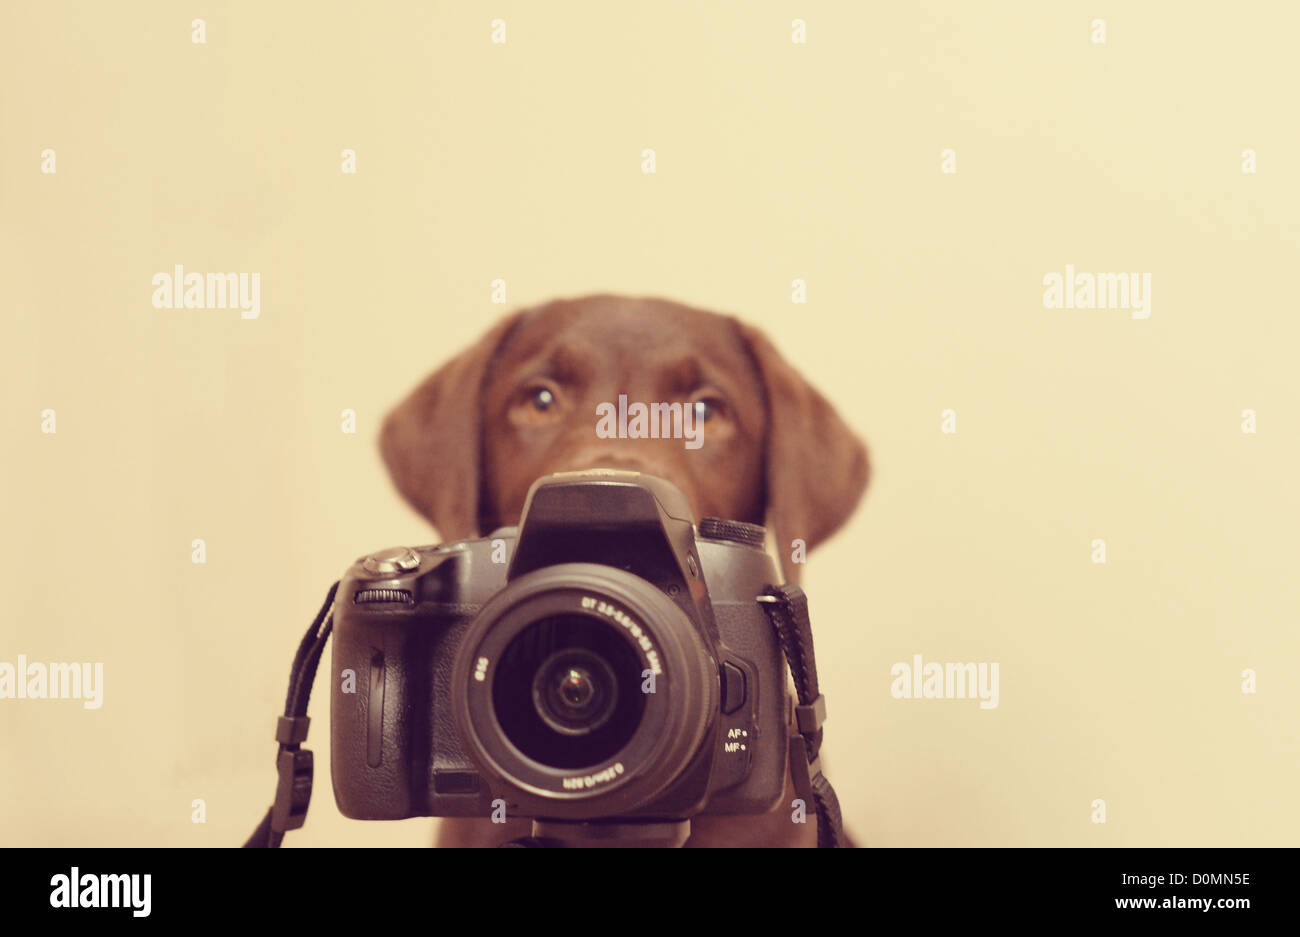 16 week old chocolate Labrador puppy. (Name and model of camera removed) Stock Photo